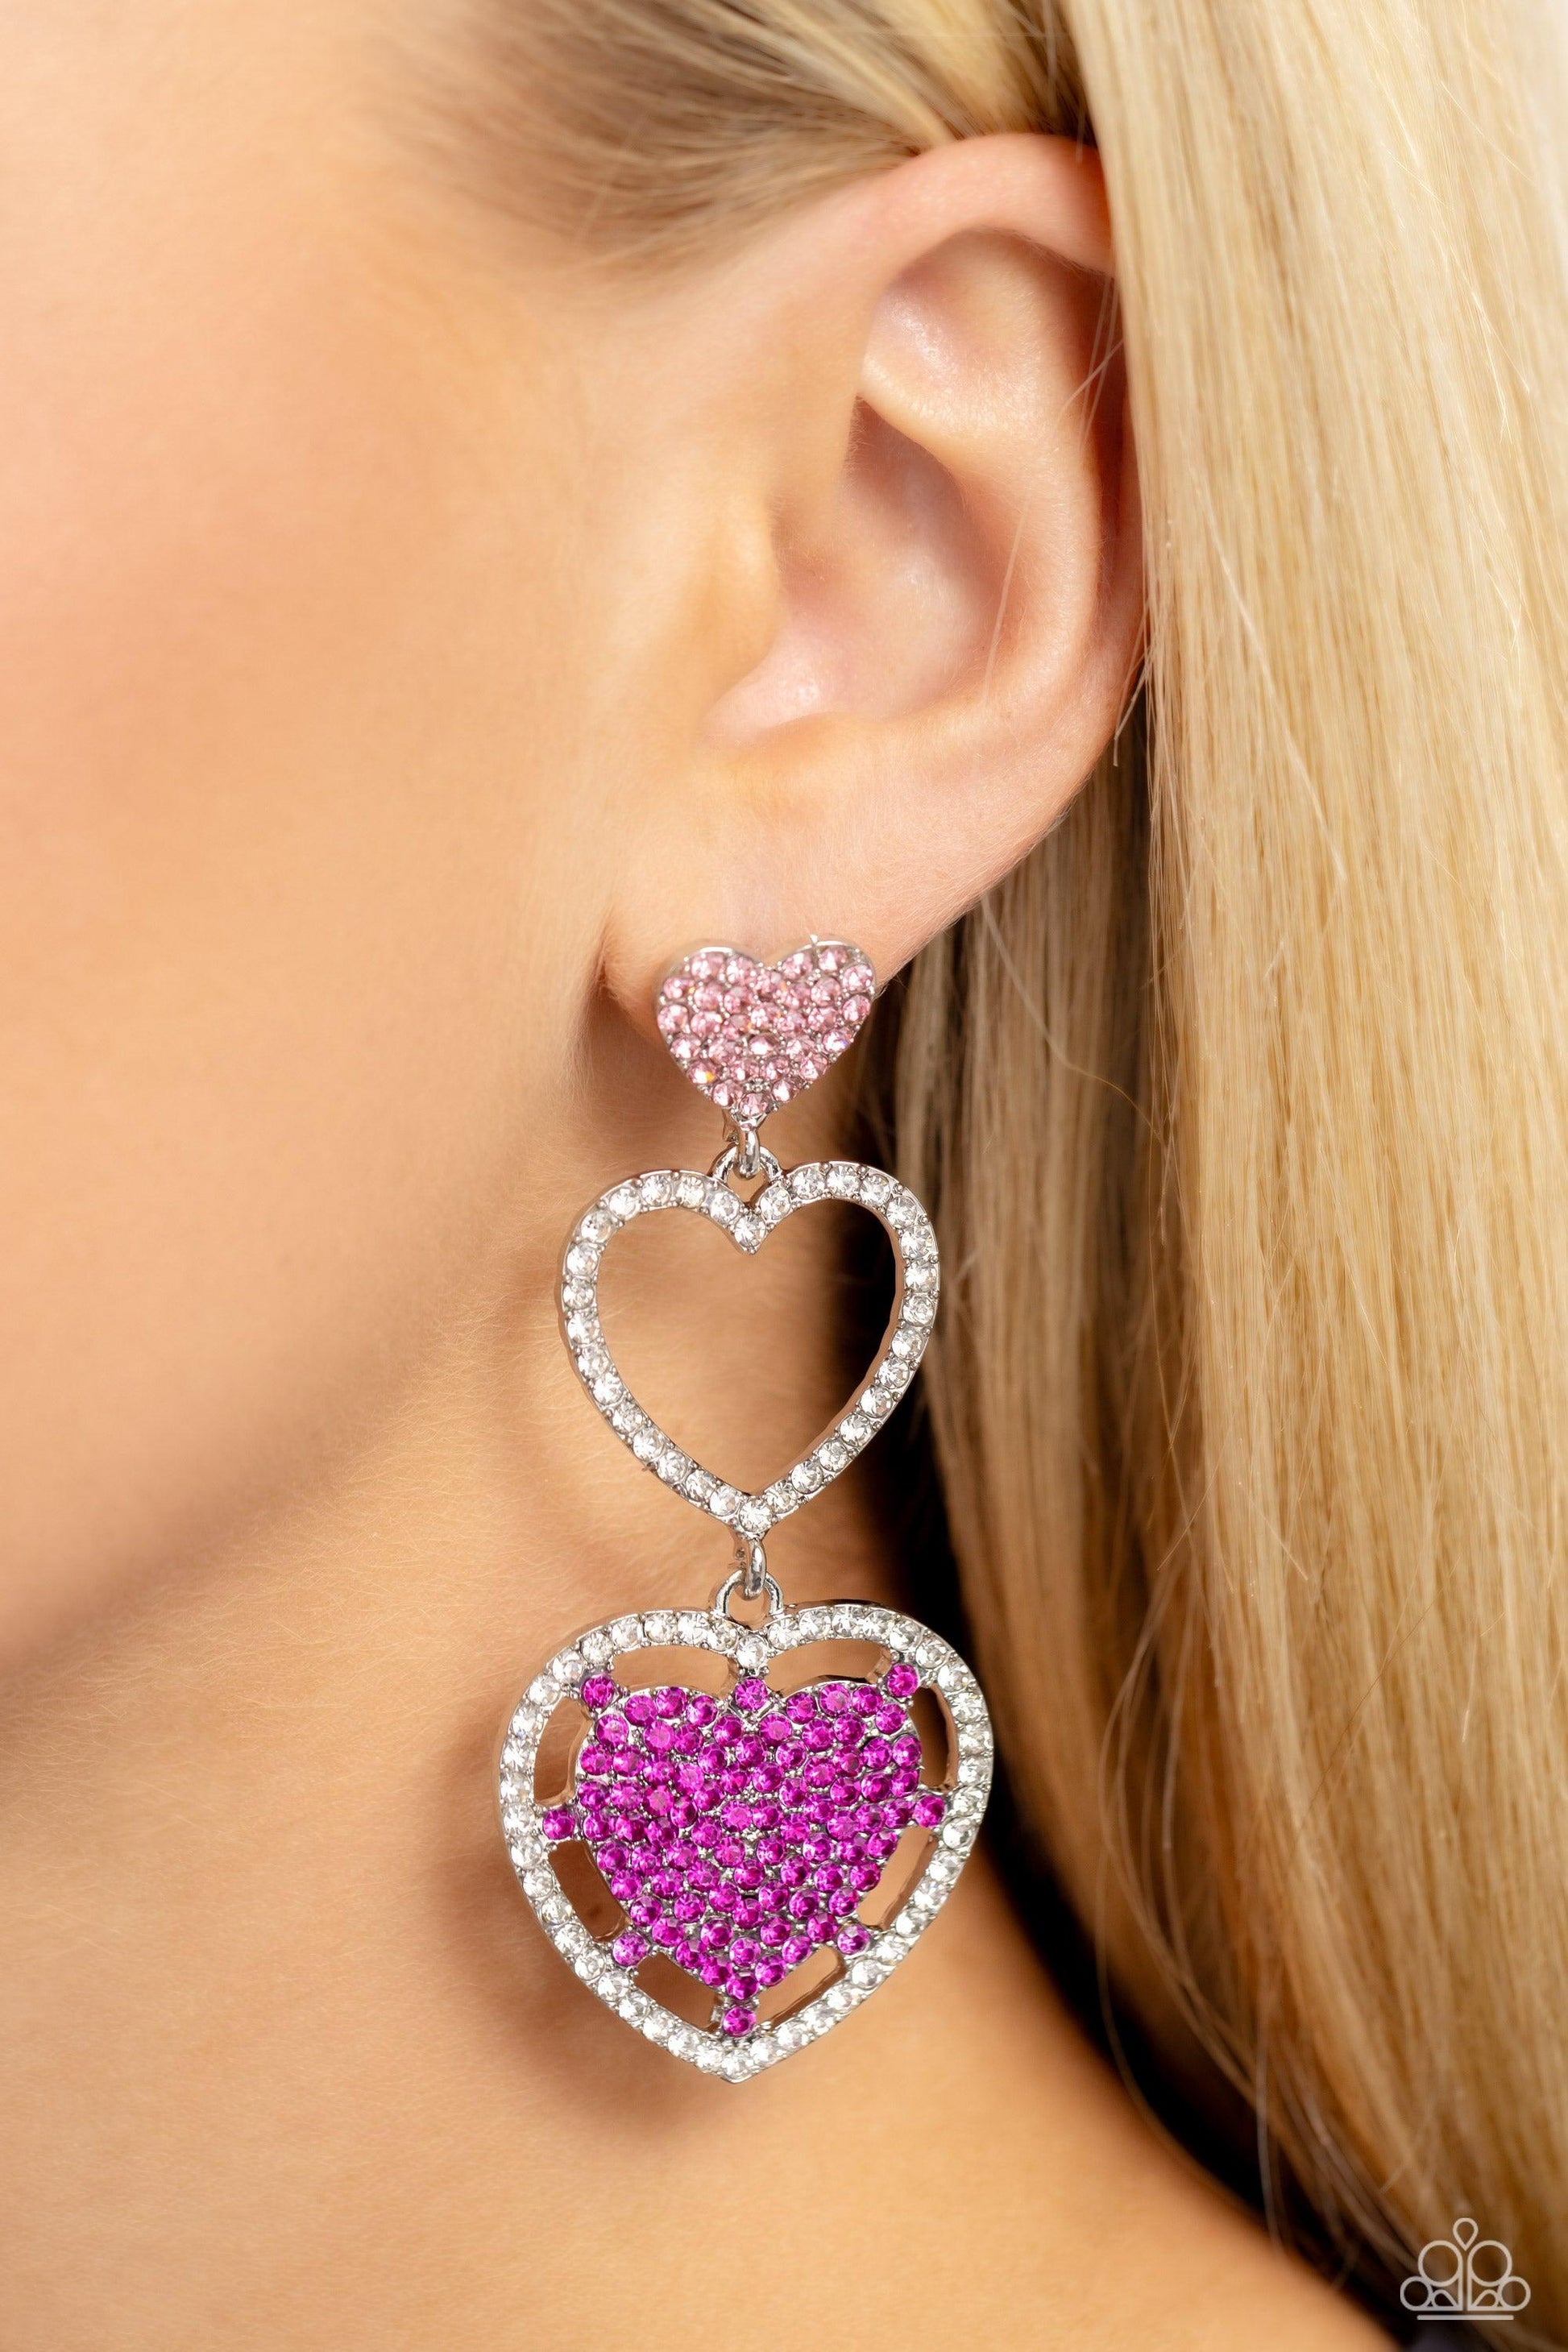 Paparazzi Accessories - Couples Celebration - Pink Earrings - Bling by JessieK